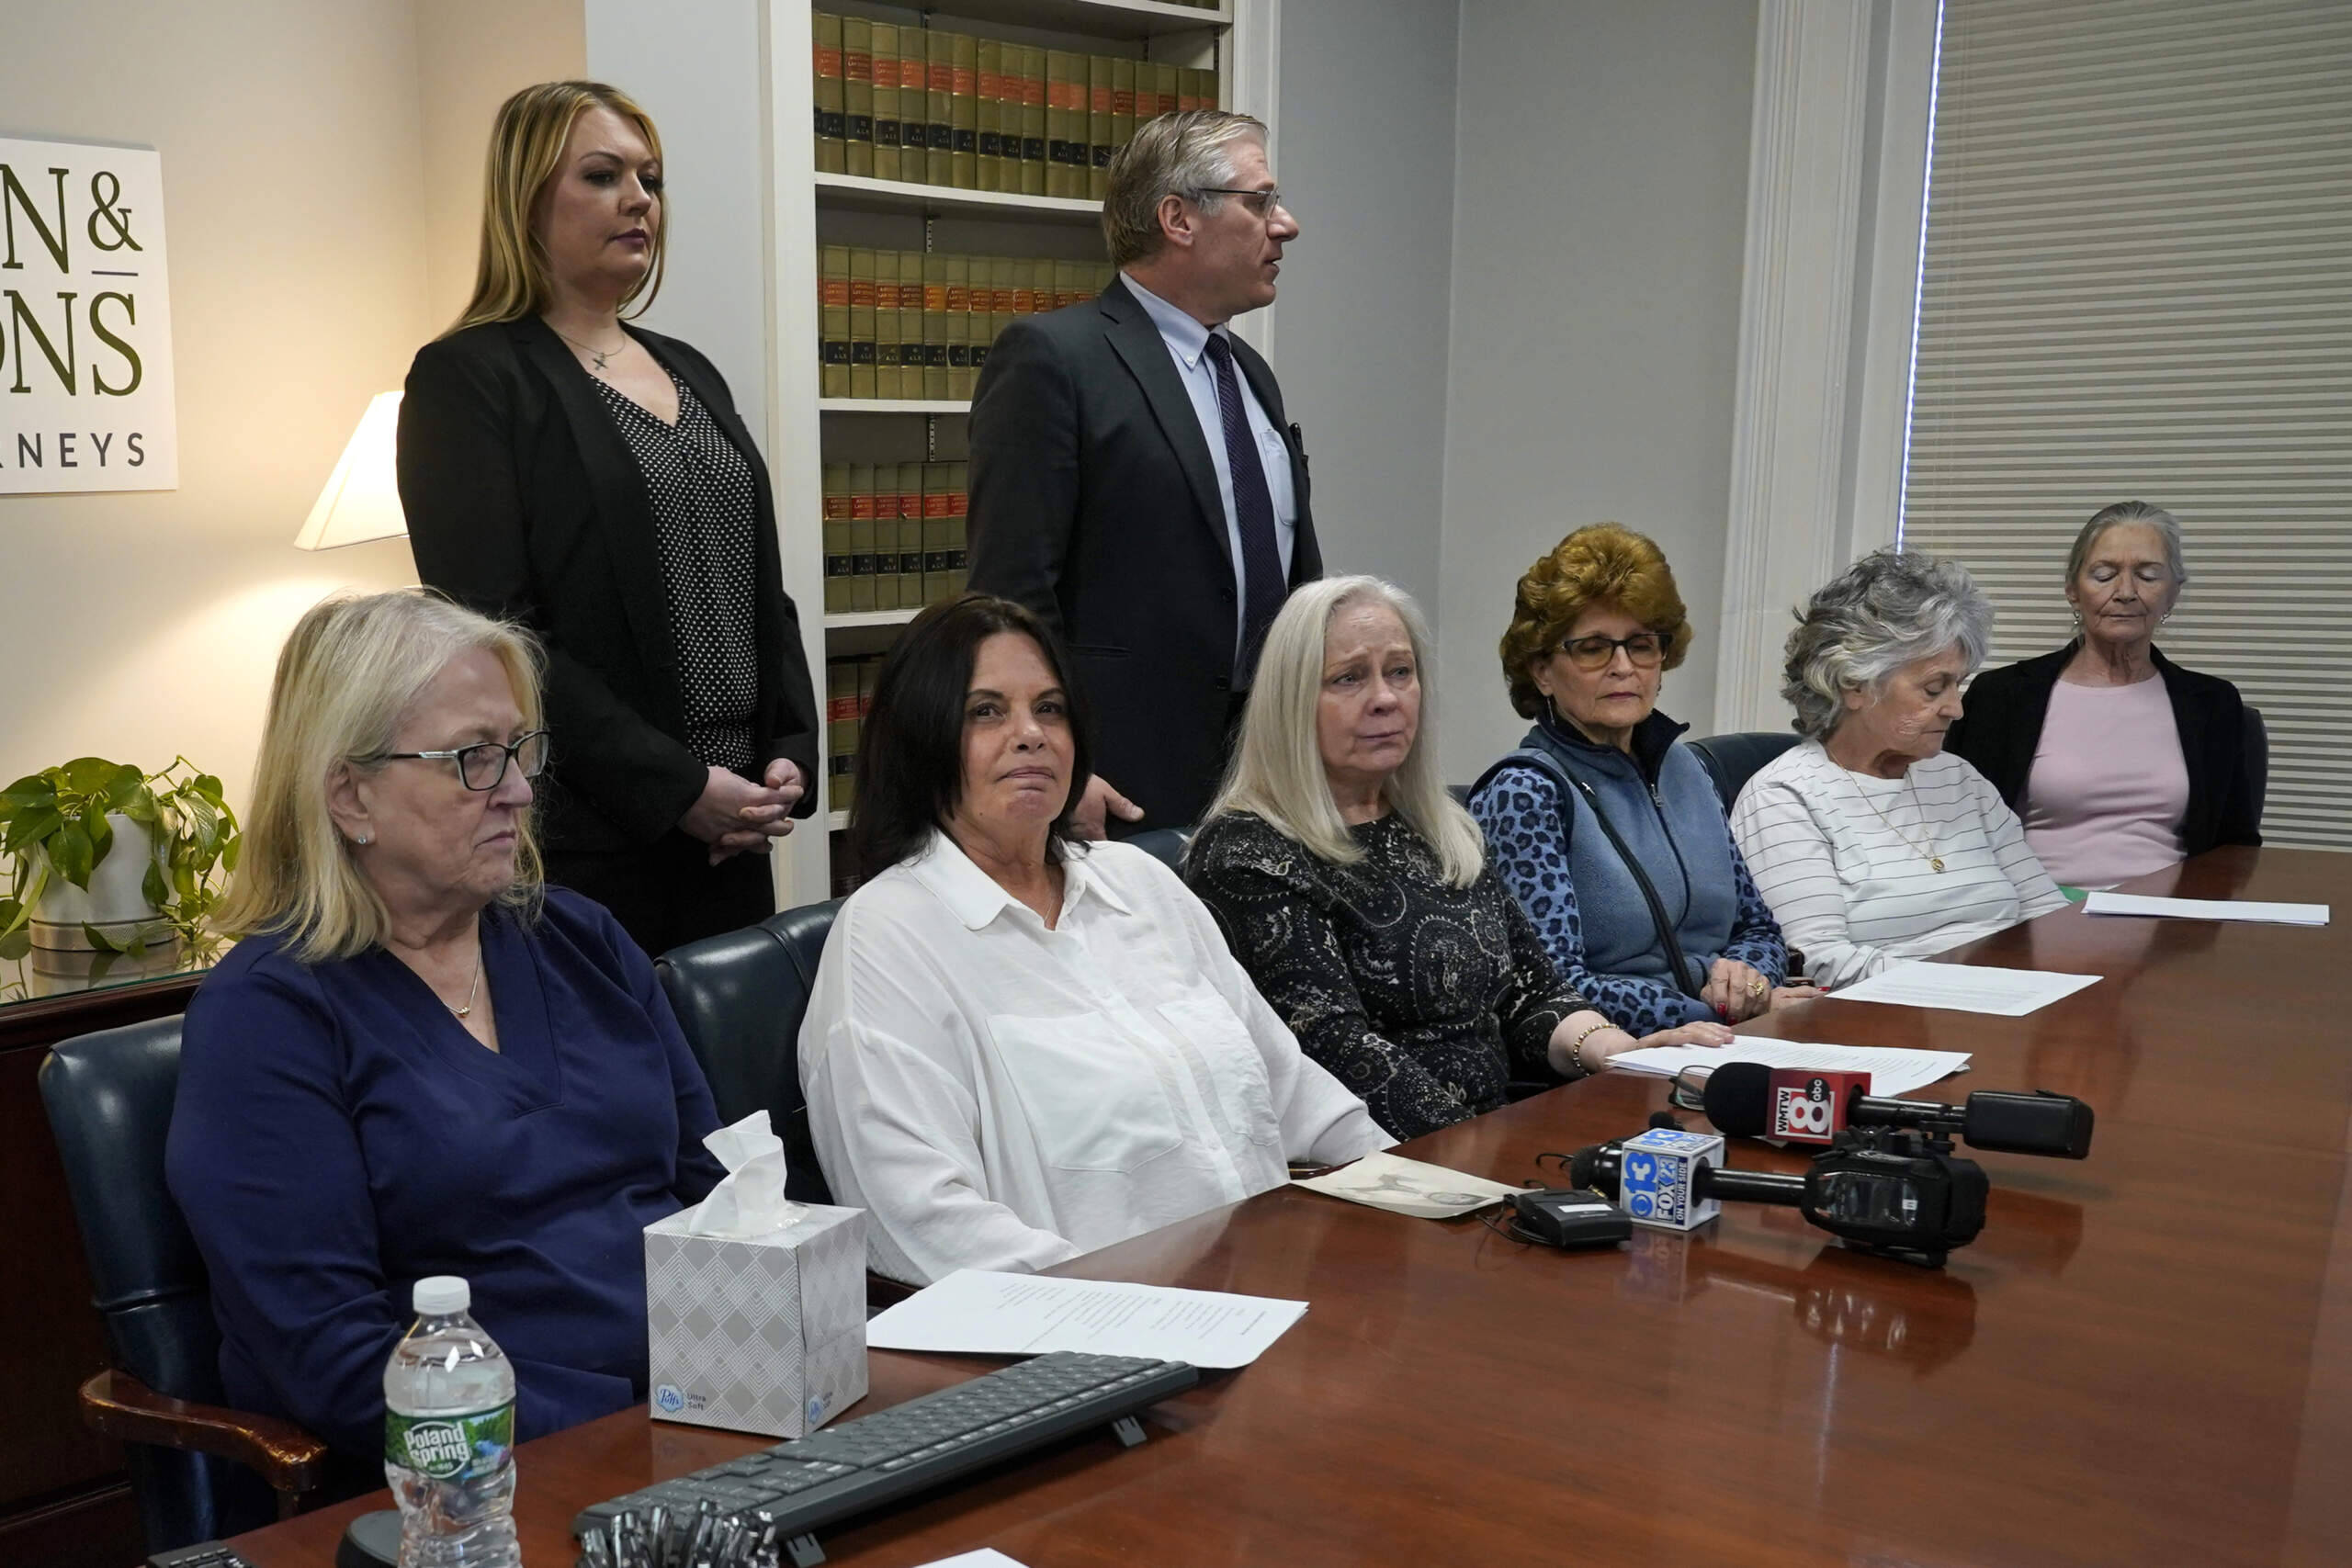 Several women seated next to Ann Allen, second from left, attend a news conference to announce they are joining Allen's lawsuit against the Roman Catholic Diocese of Portland, Wednesday, March 8, 2023, in Portland, Maine. (Robert F. Bukaty/AP)